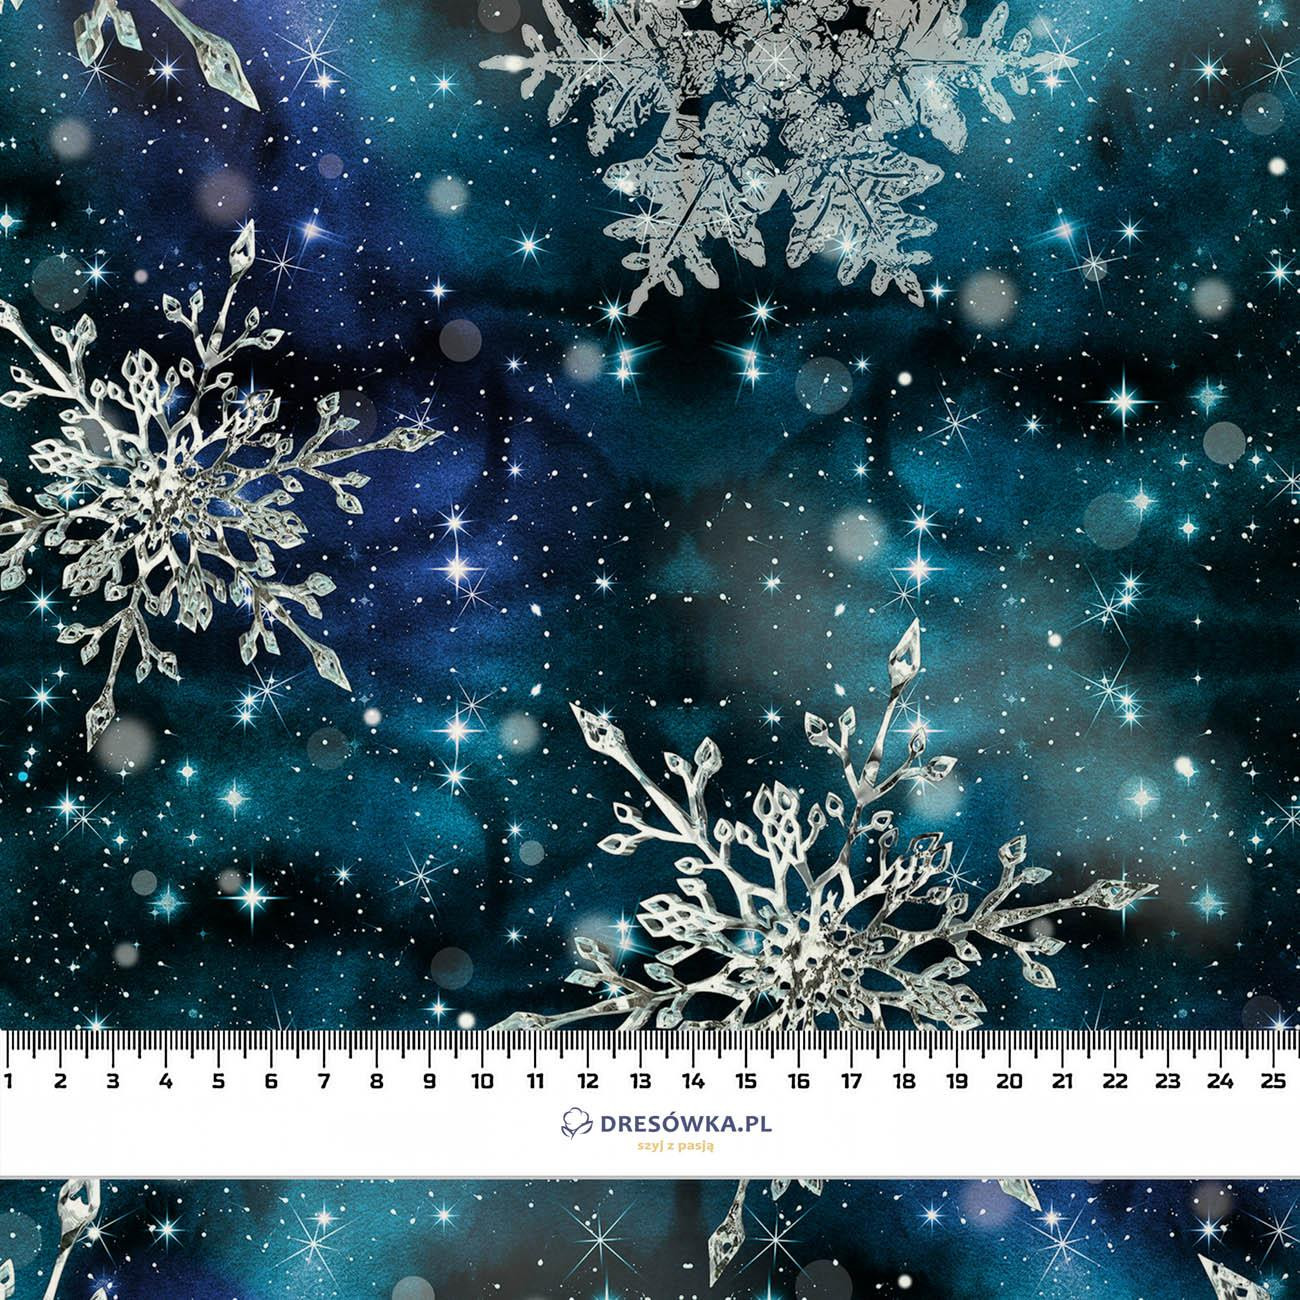 WINTER GALAXY PAT. 2 - Woven Fabric for tablecloths